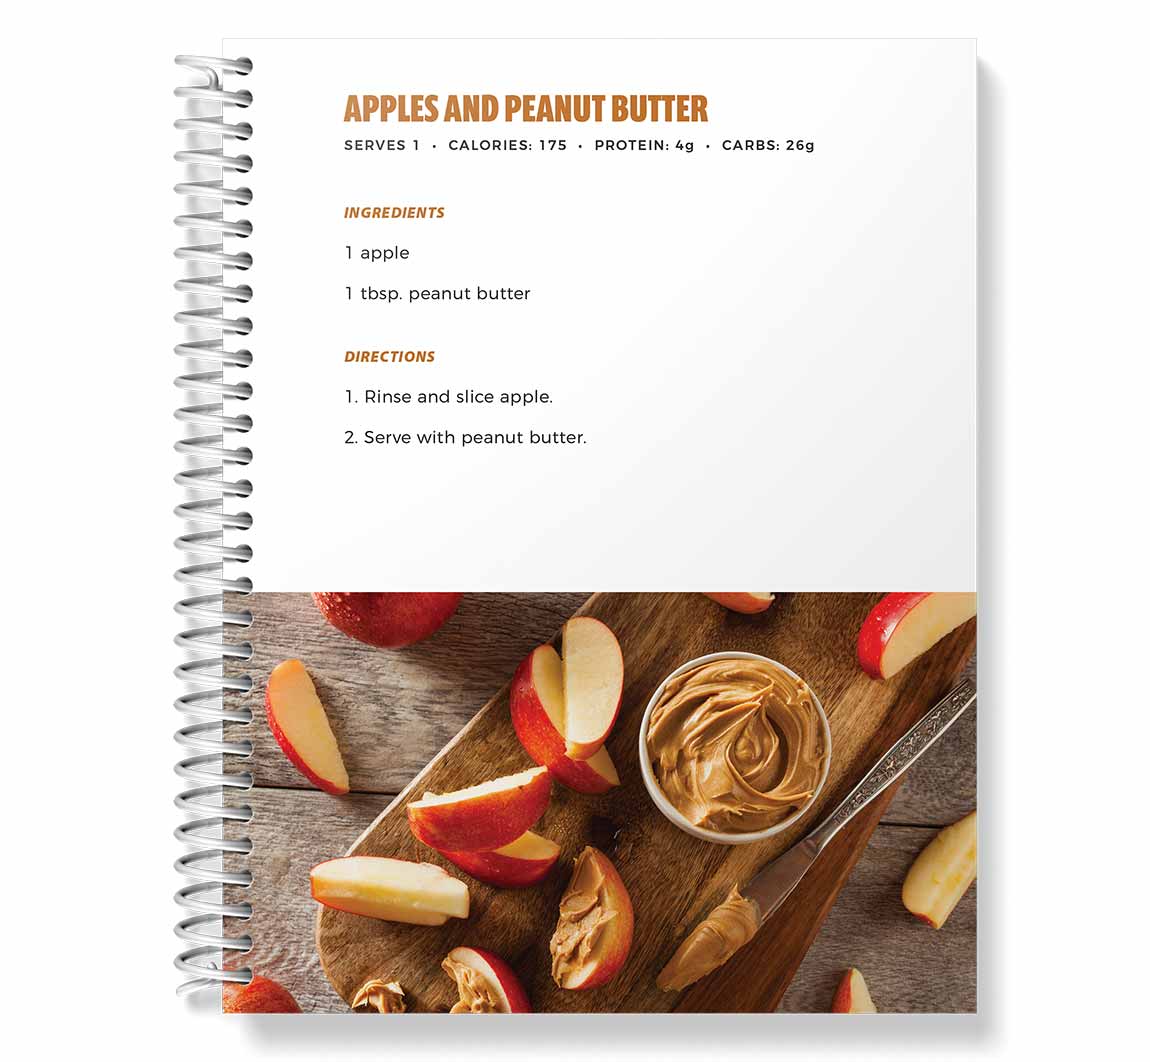 Apples and Peanut Butter image